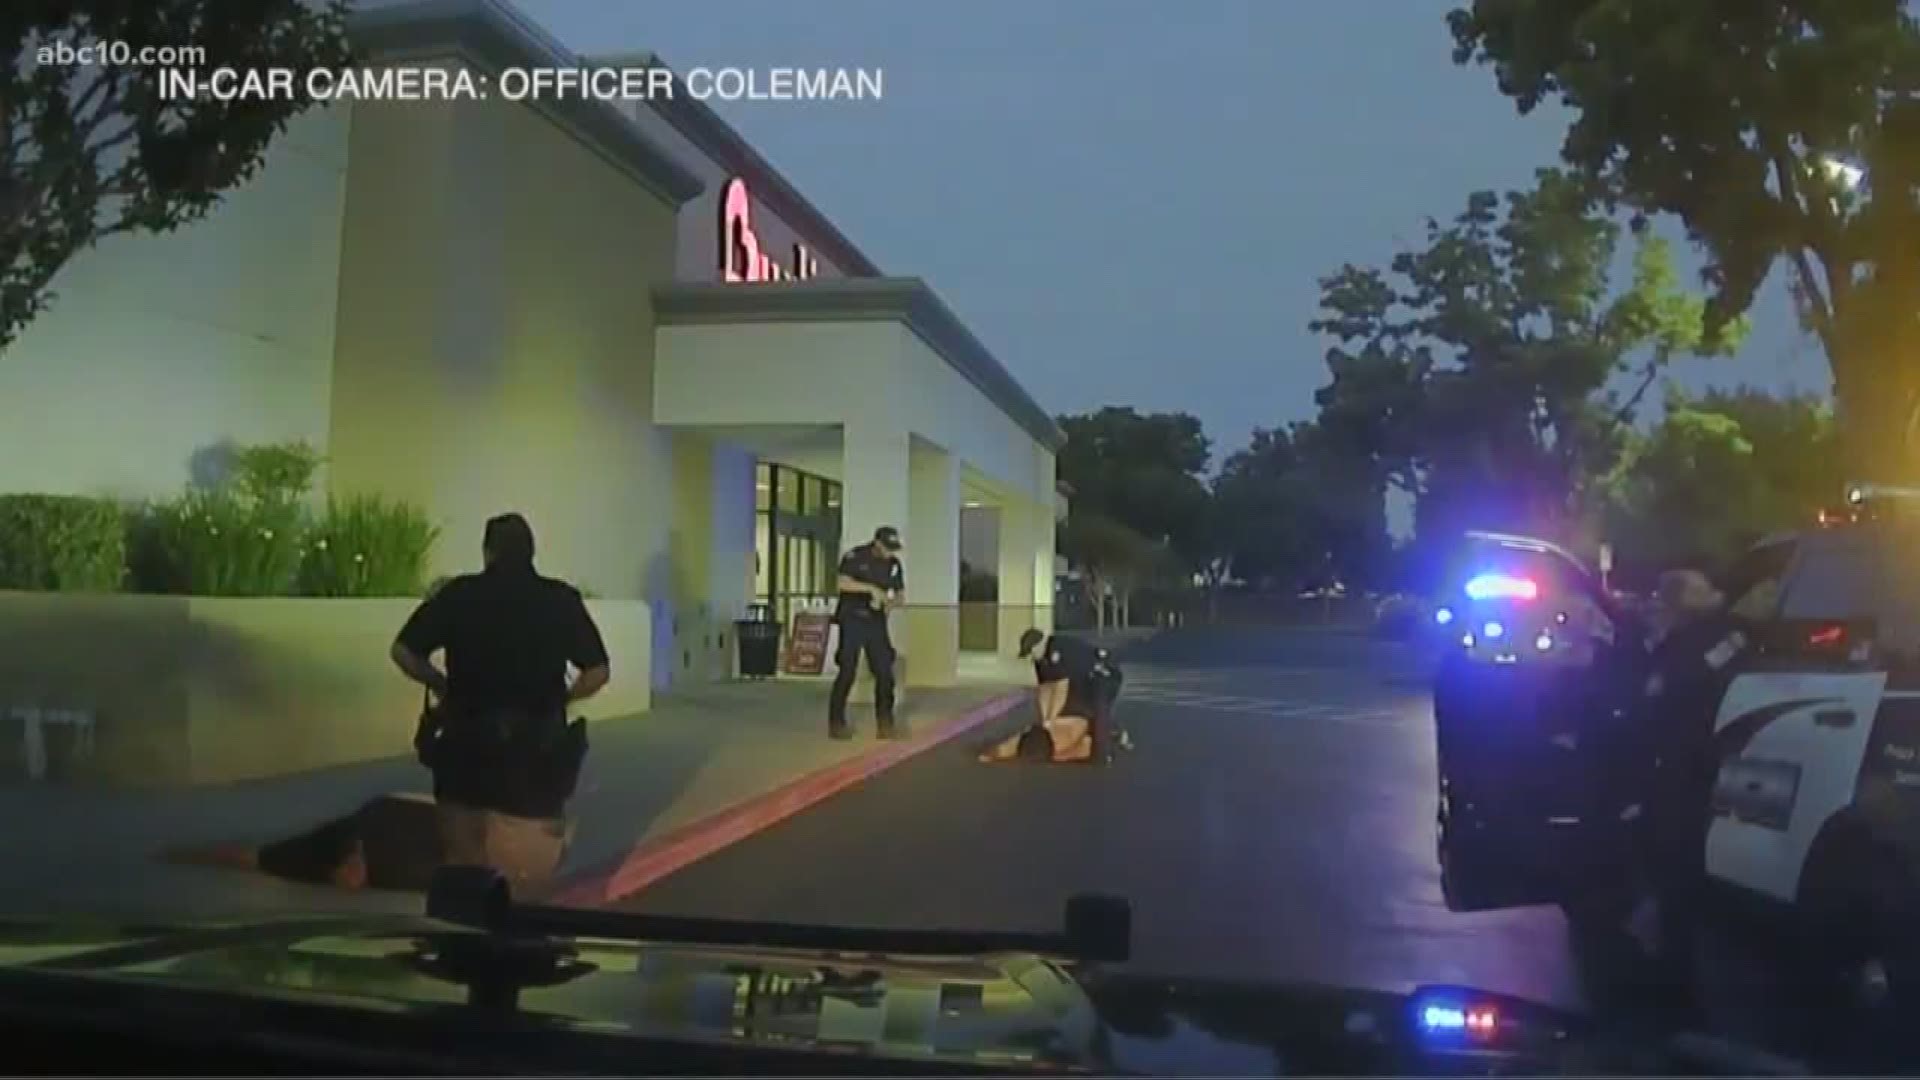 Police dash cam video shows an officer kicking a person in the head.